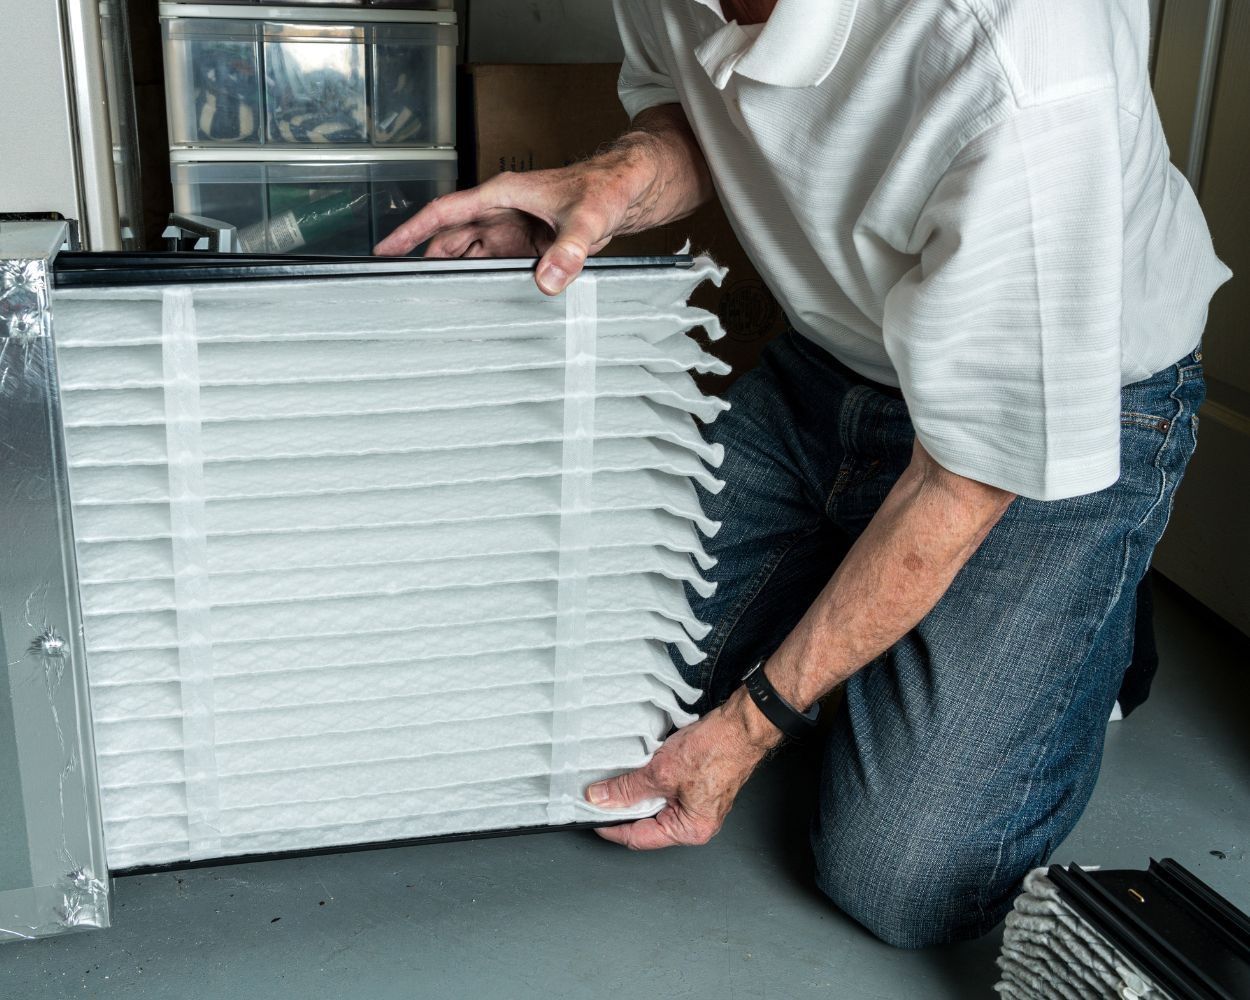 Contact us for all your HVAC installation and maintenance needs in Berks County, PA.